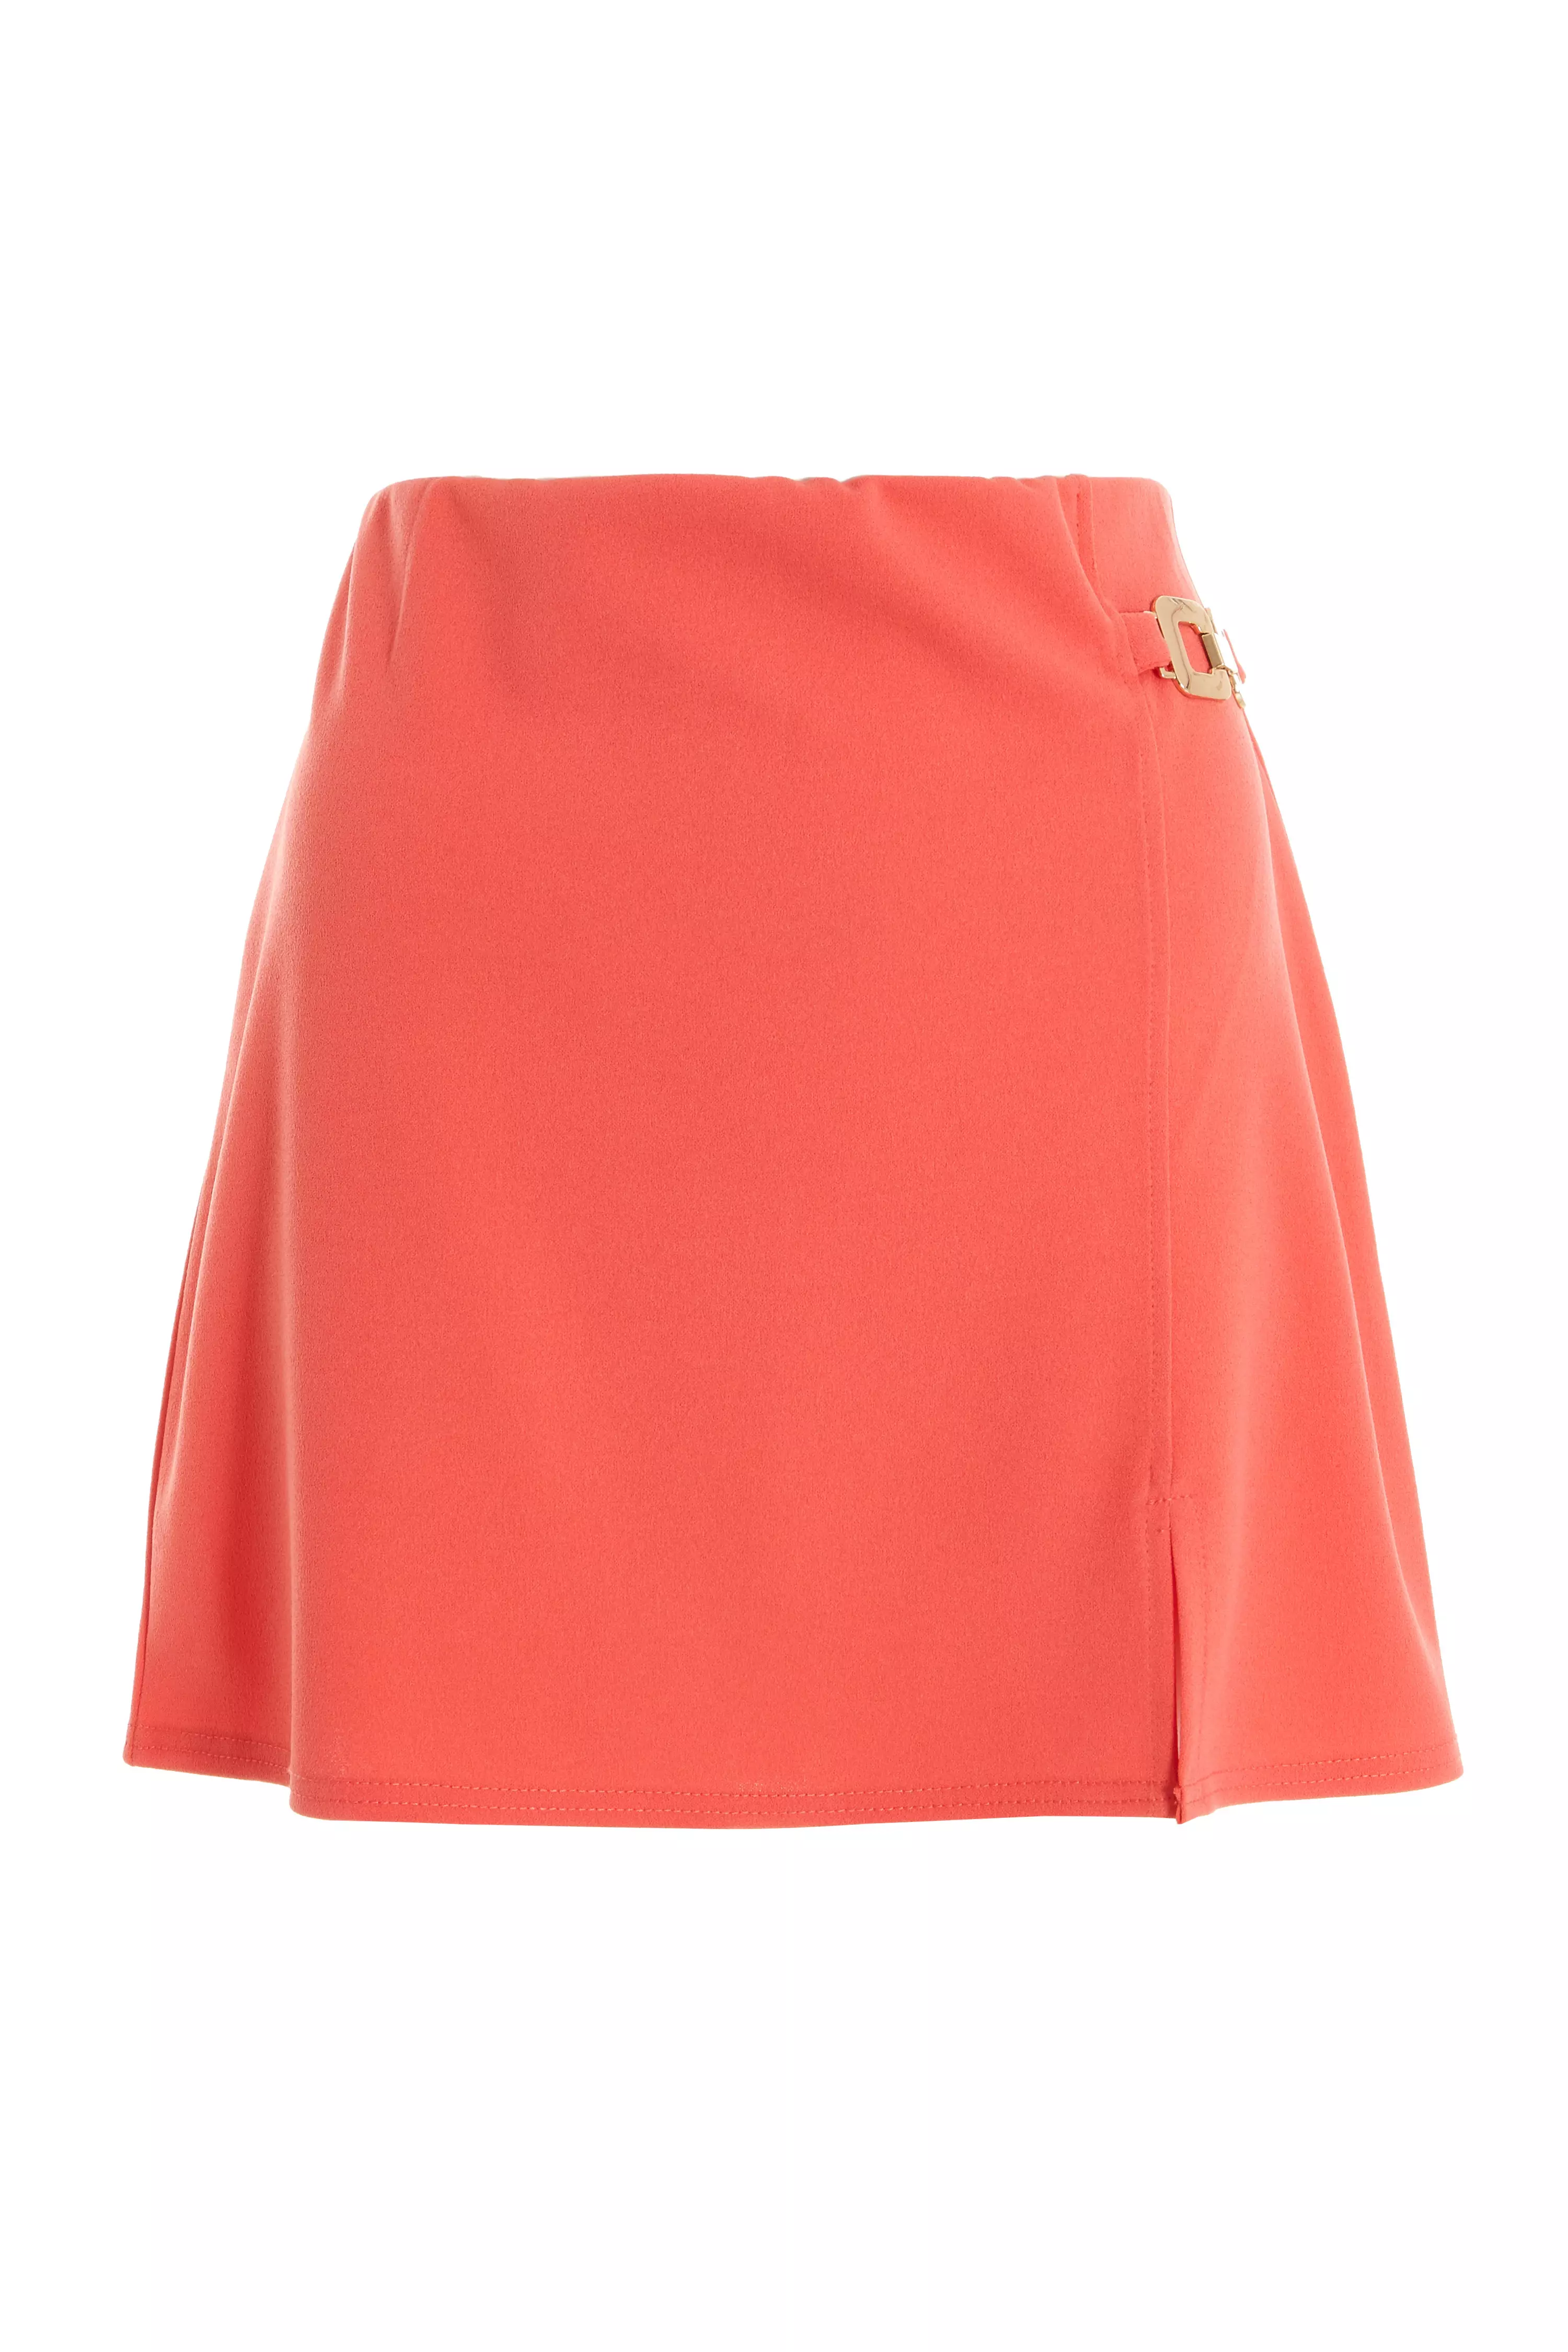 Coral Buckle Skirt - QUIZ Clothing